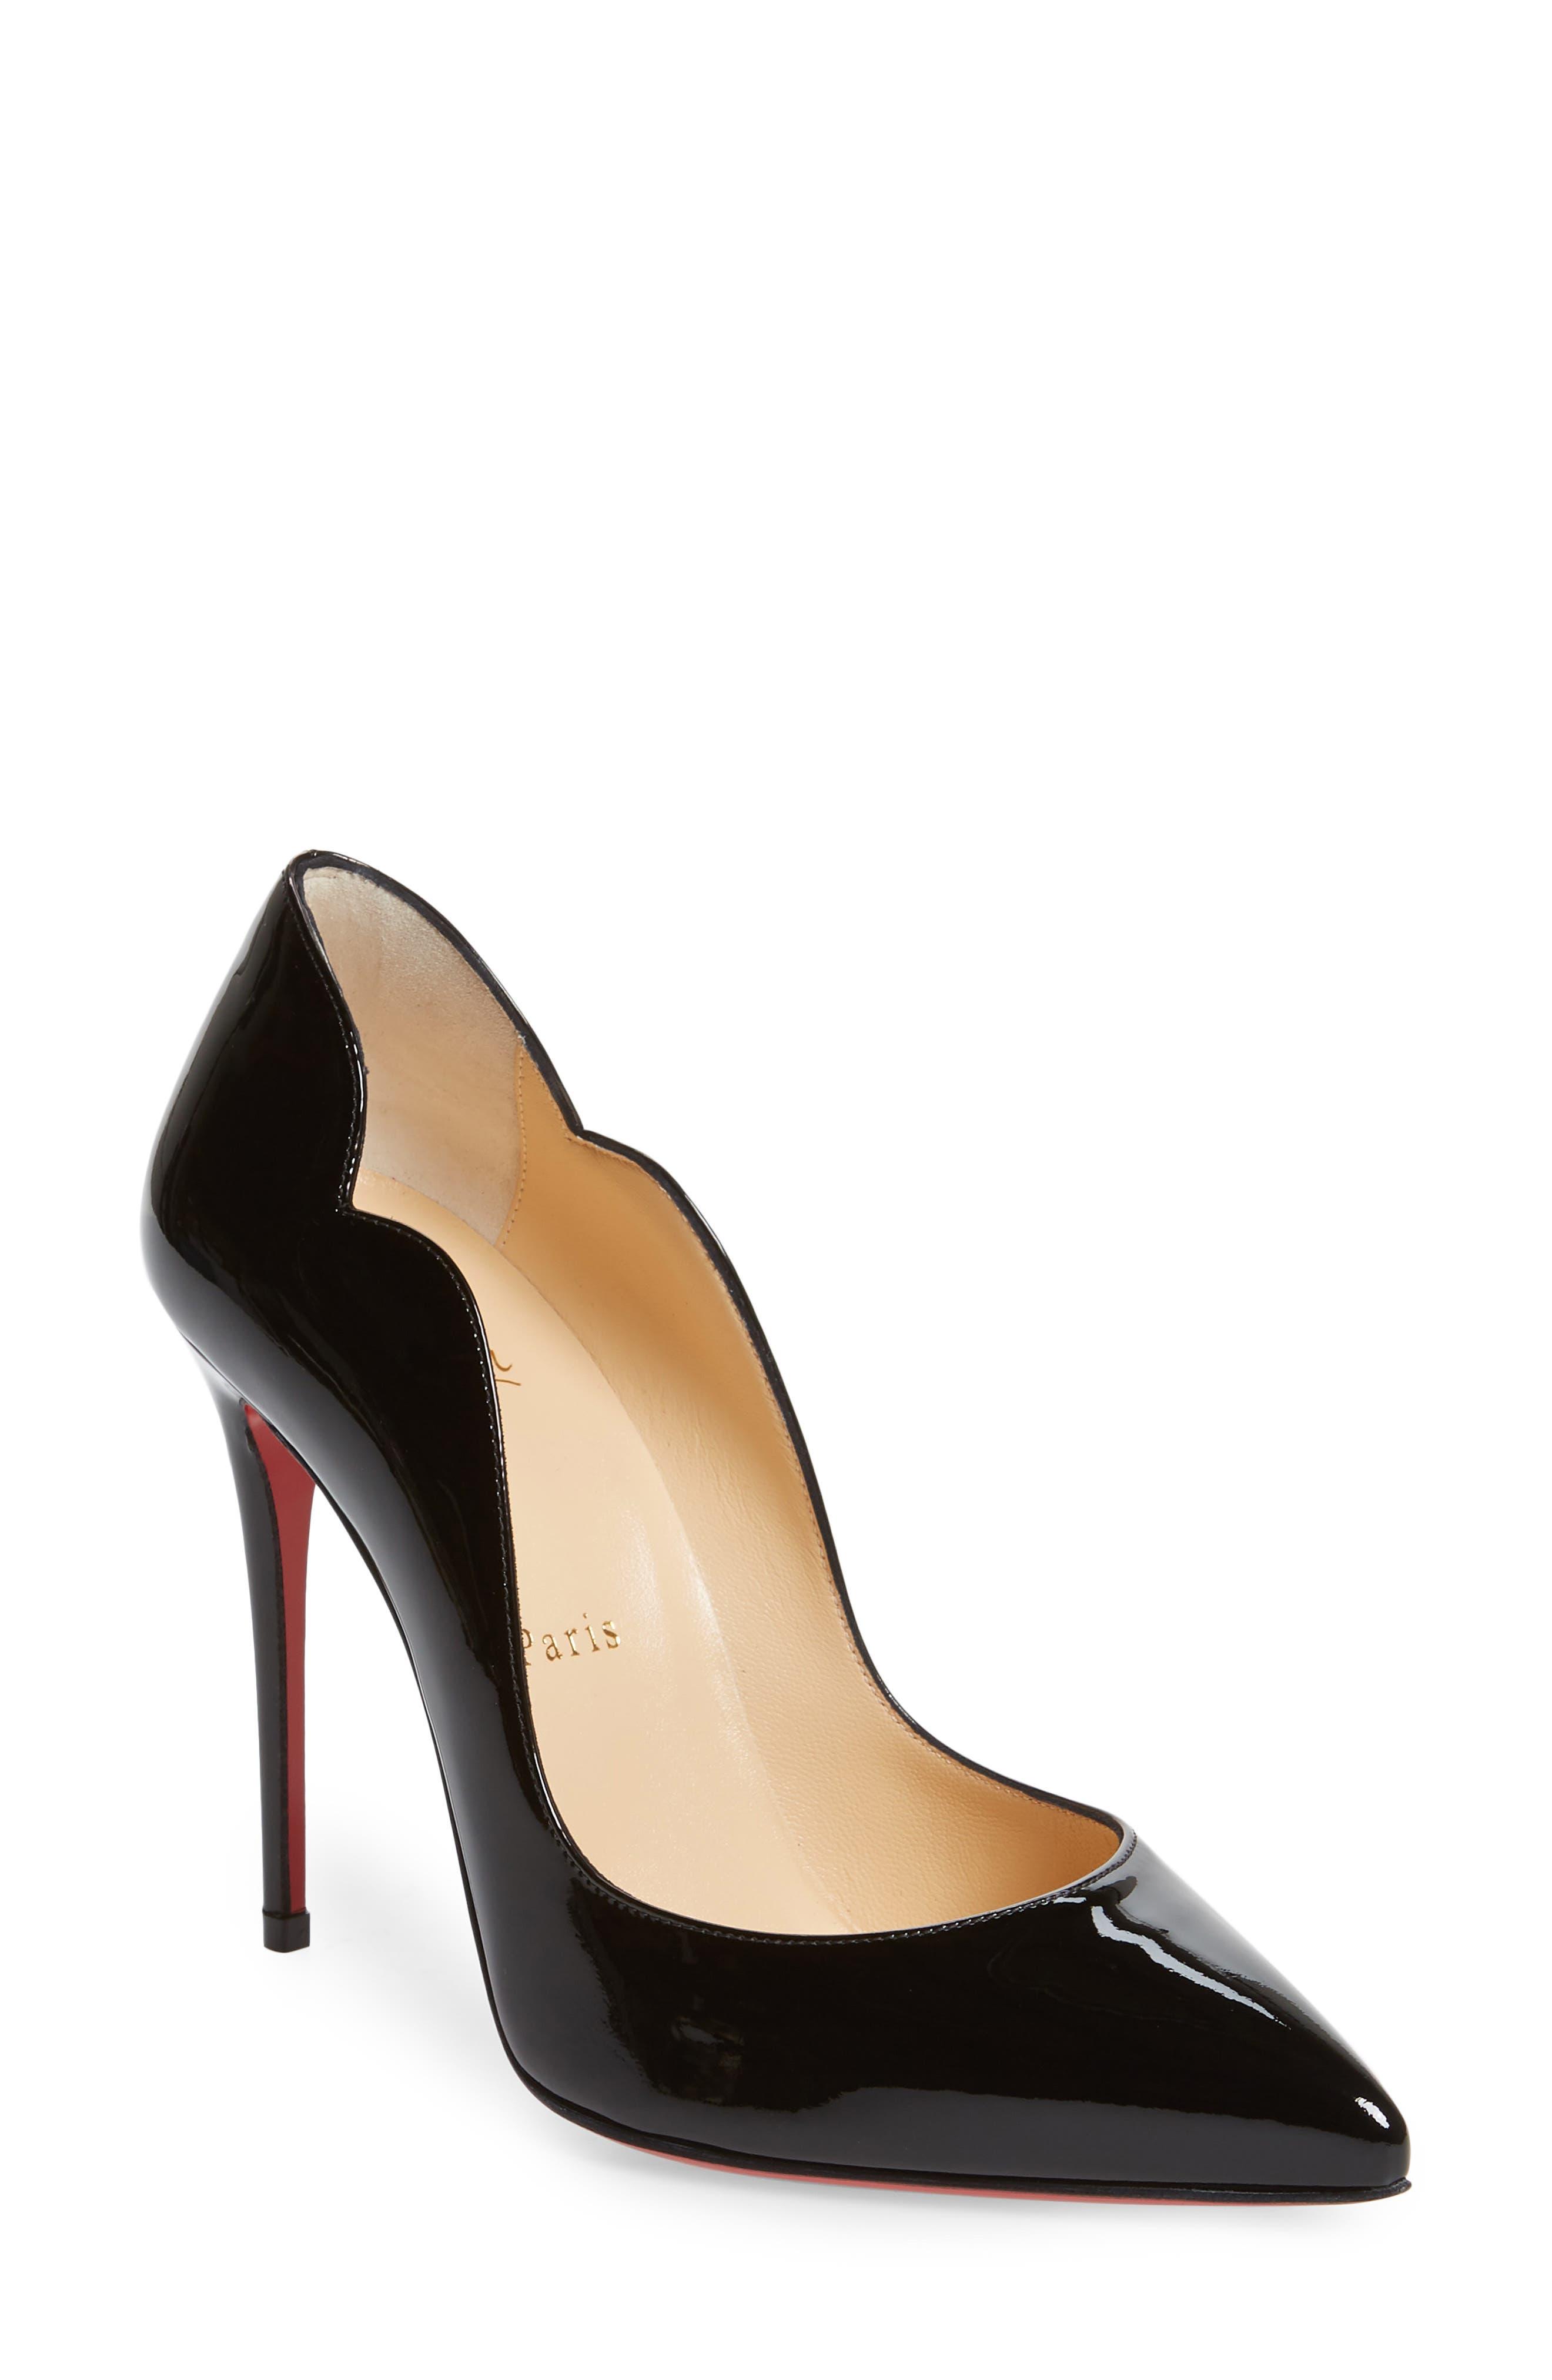 Christian Louboutin Hot Chick Scallop Pointed Toe Pump in Black | Lyst